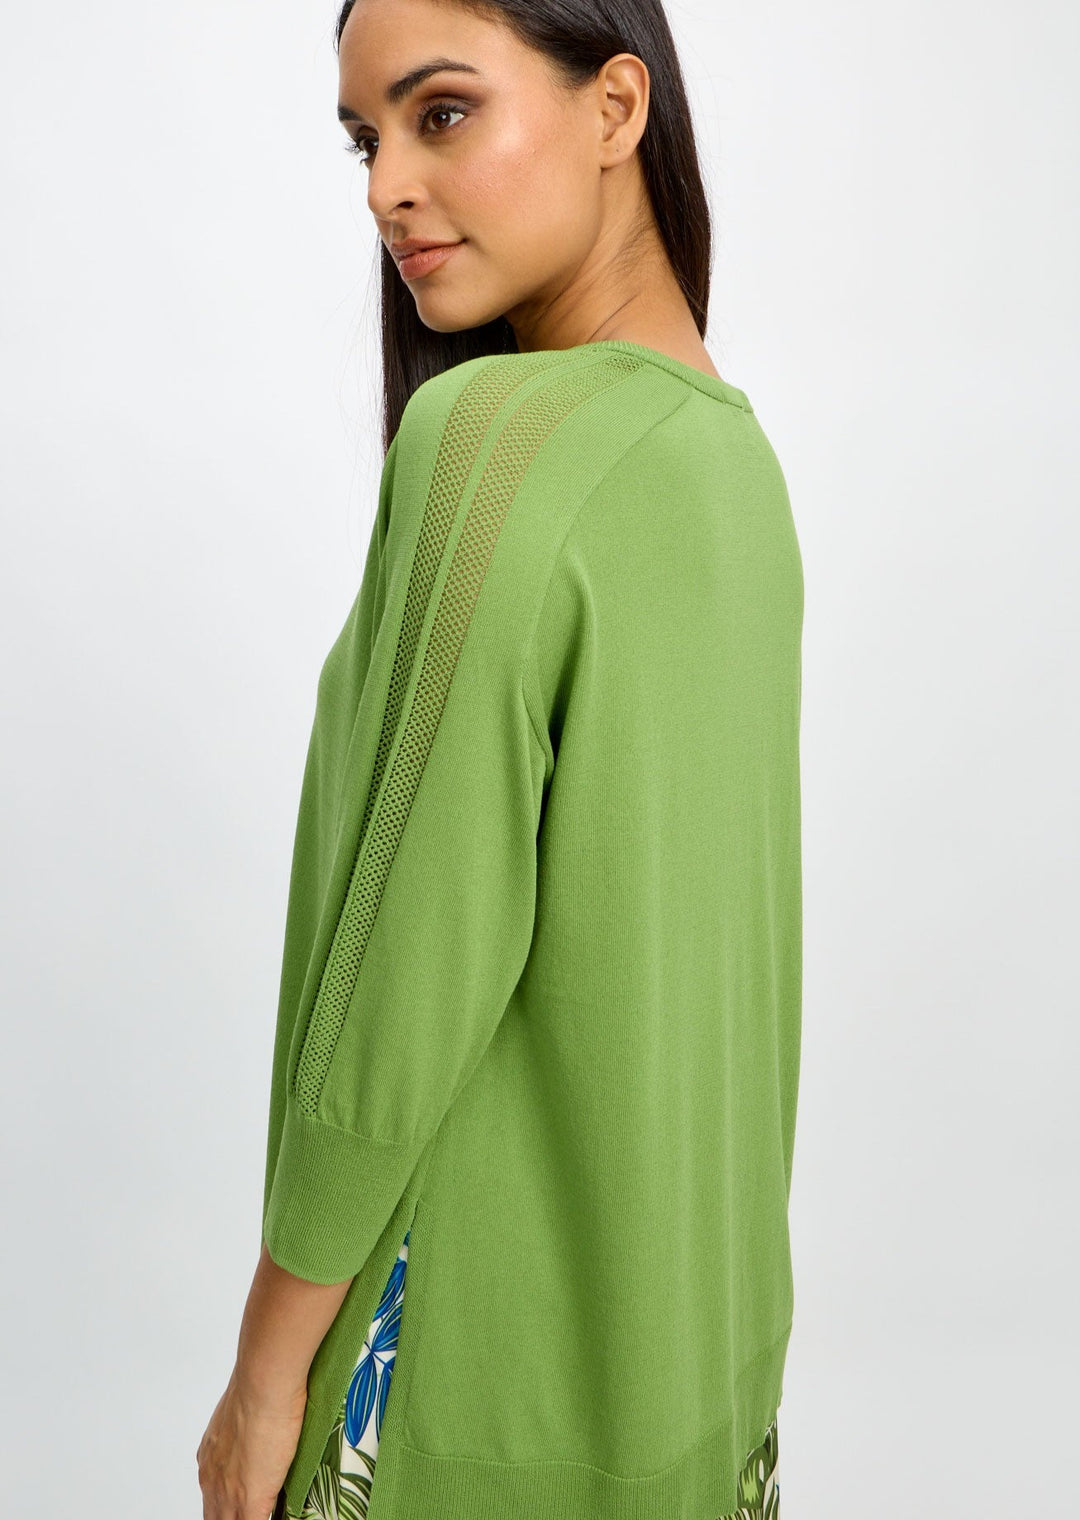 Emproved - 3/4 Sleeve Dolman Sweater